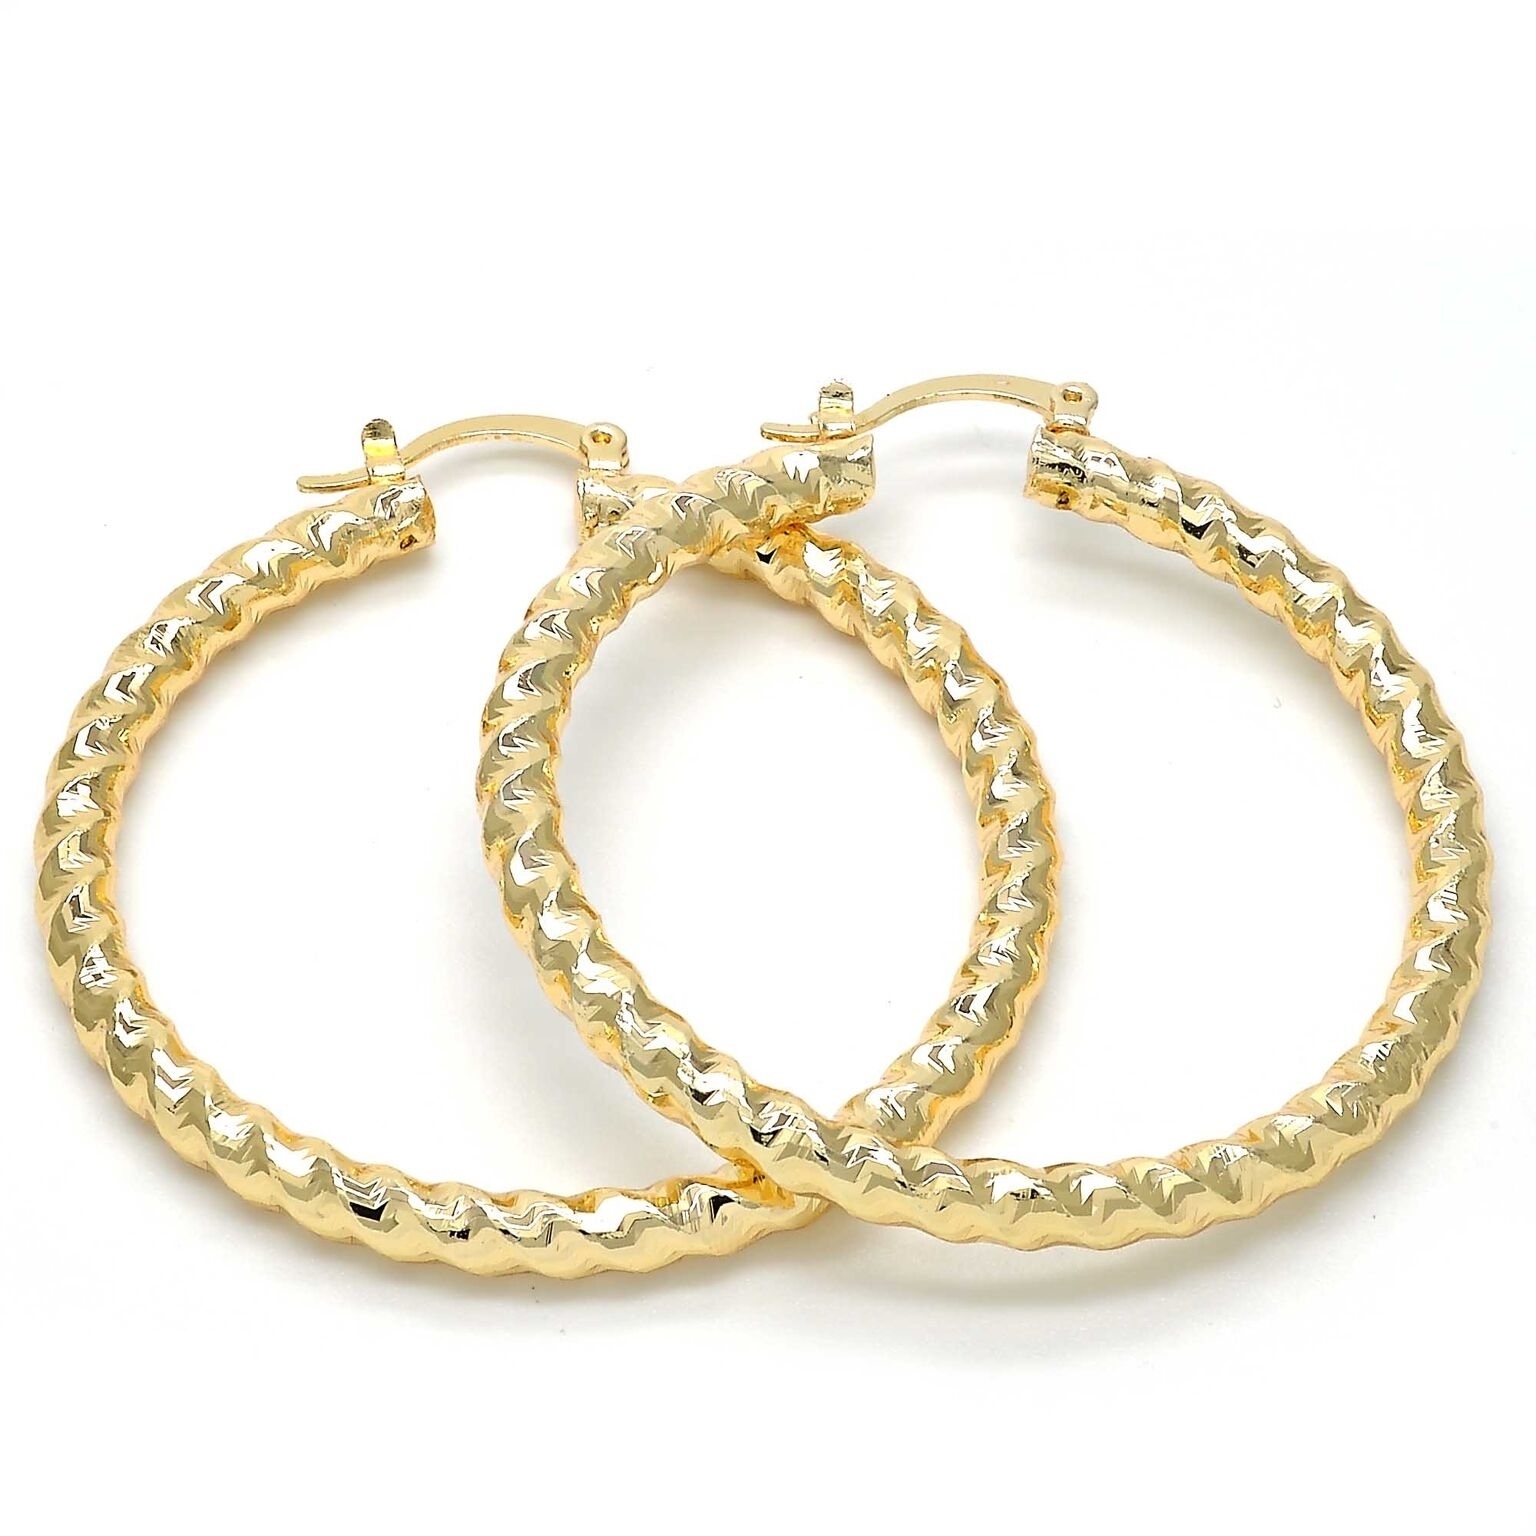 Gold FILLED Large Hoop, Twist And Hollow Design, Golden Tone 50MM